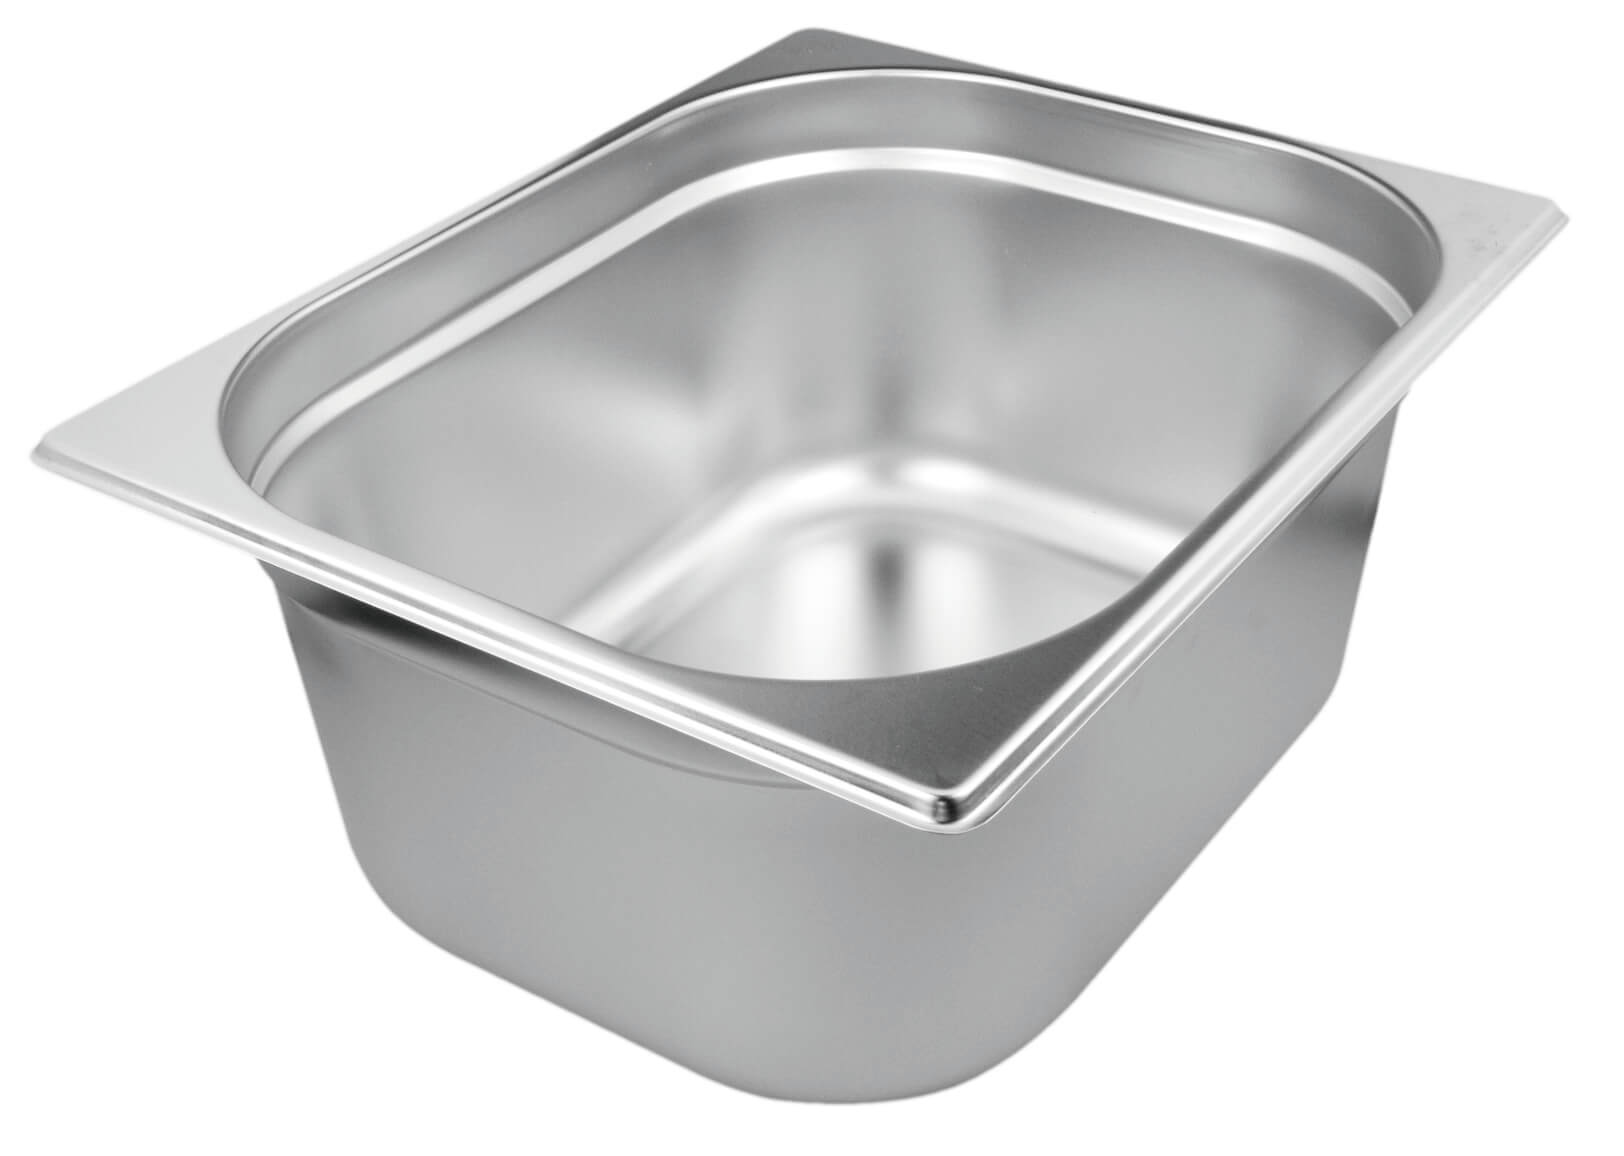 Gastronomy-standard container 65mm depth - stainless steel (GN 1/2)